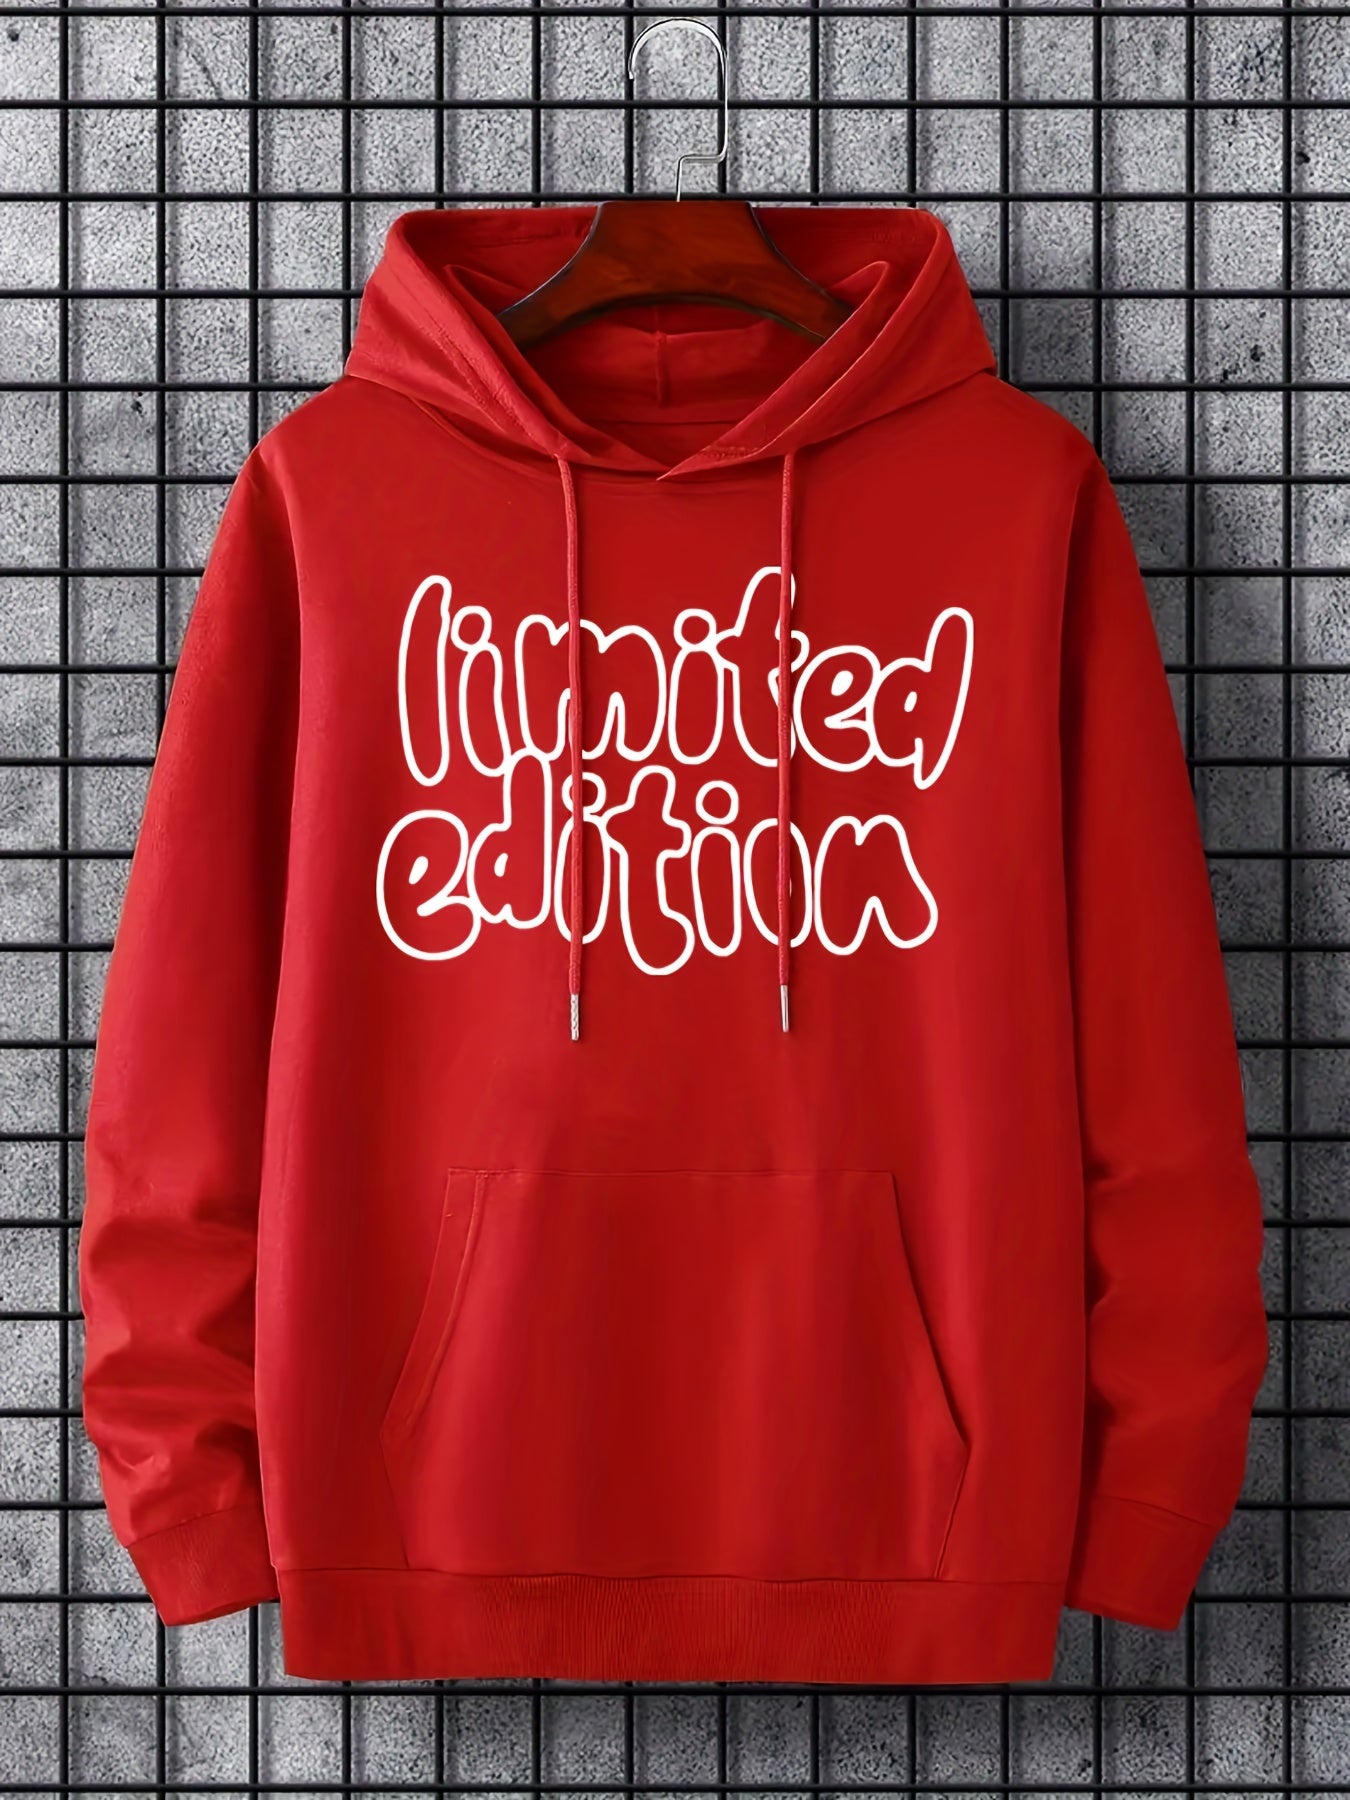 ''Limited Edition'' Graphic Men's Fleece Casual Drawstring Hoodie Sweatshirt Long Sleeve Fashion Hooded Pullover Hoodies With Pocket